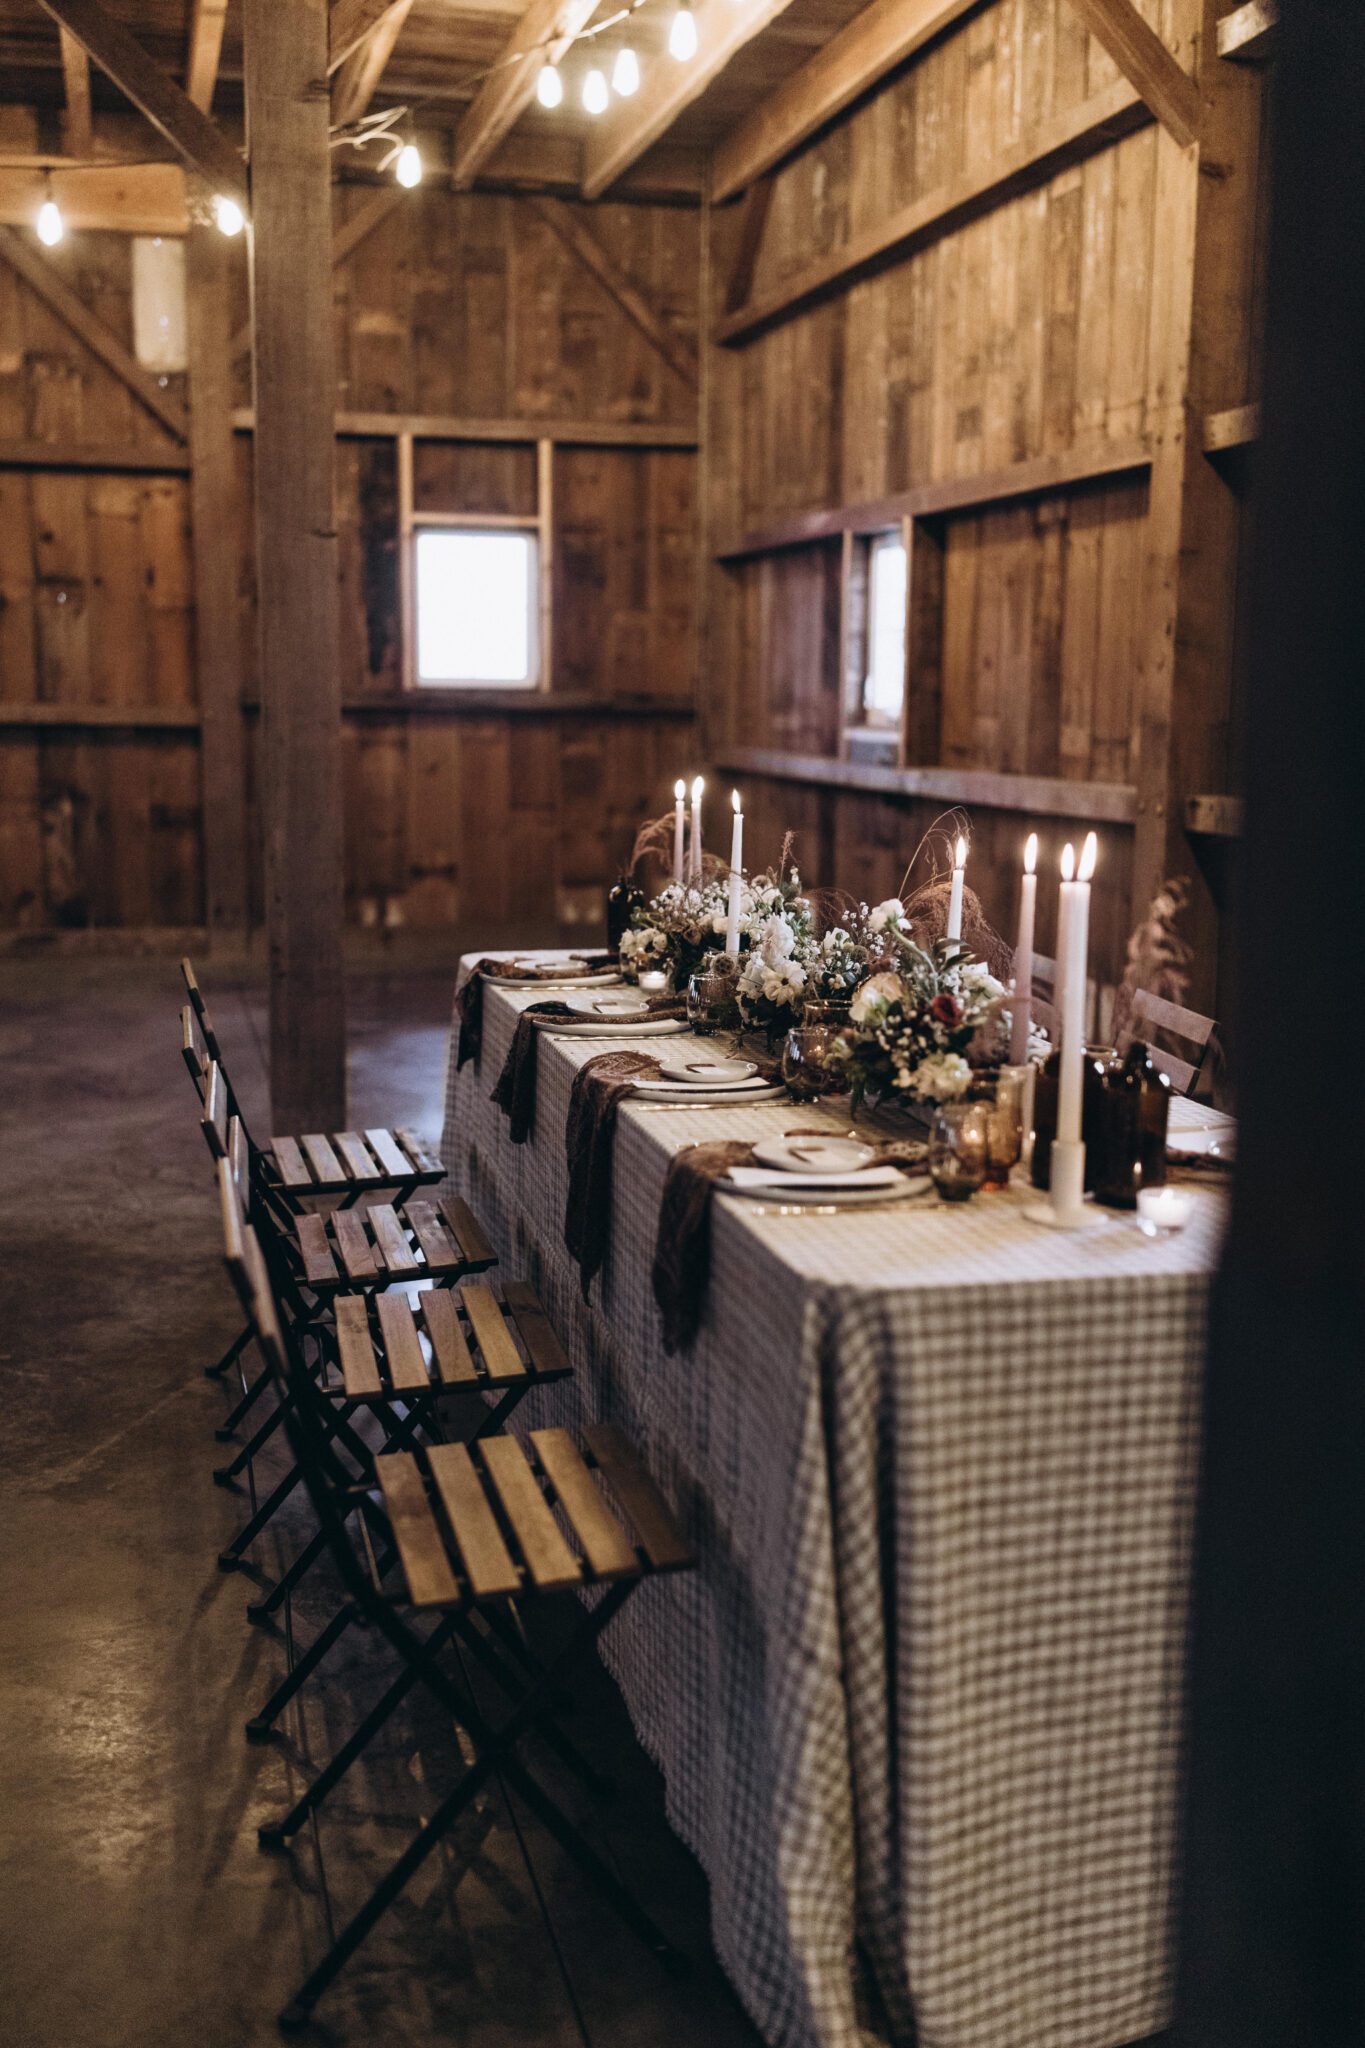 Country Chic style wedding inspiration with patterned tablescape, checkered and textured linens, unique and earthy florals covering the table, candle-lit style dinner. 